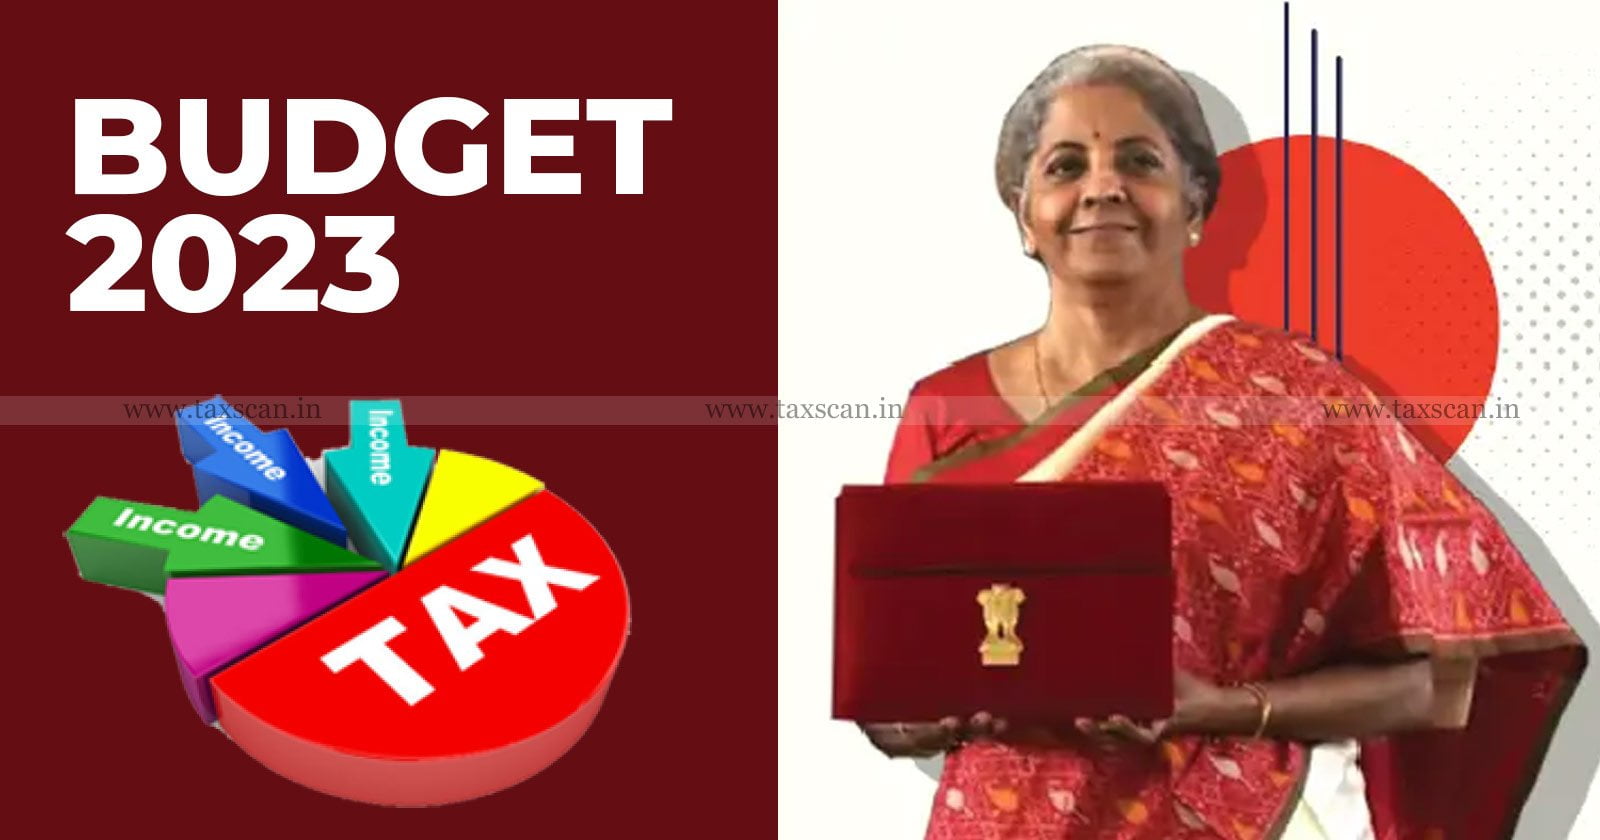 Union Budget 2023 - Middle Class can expect these 5 Changes - Taxscan